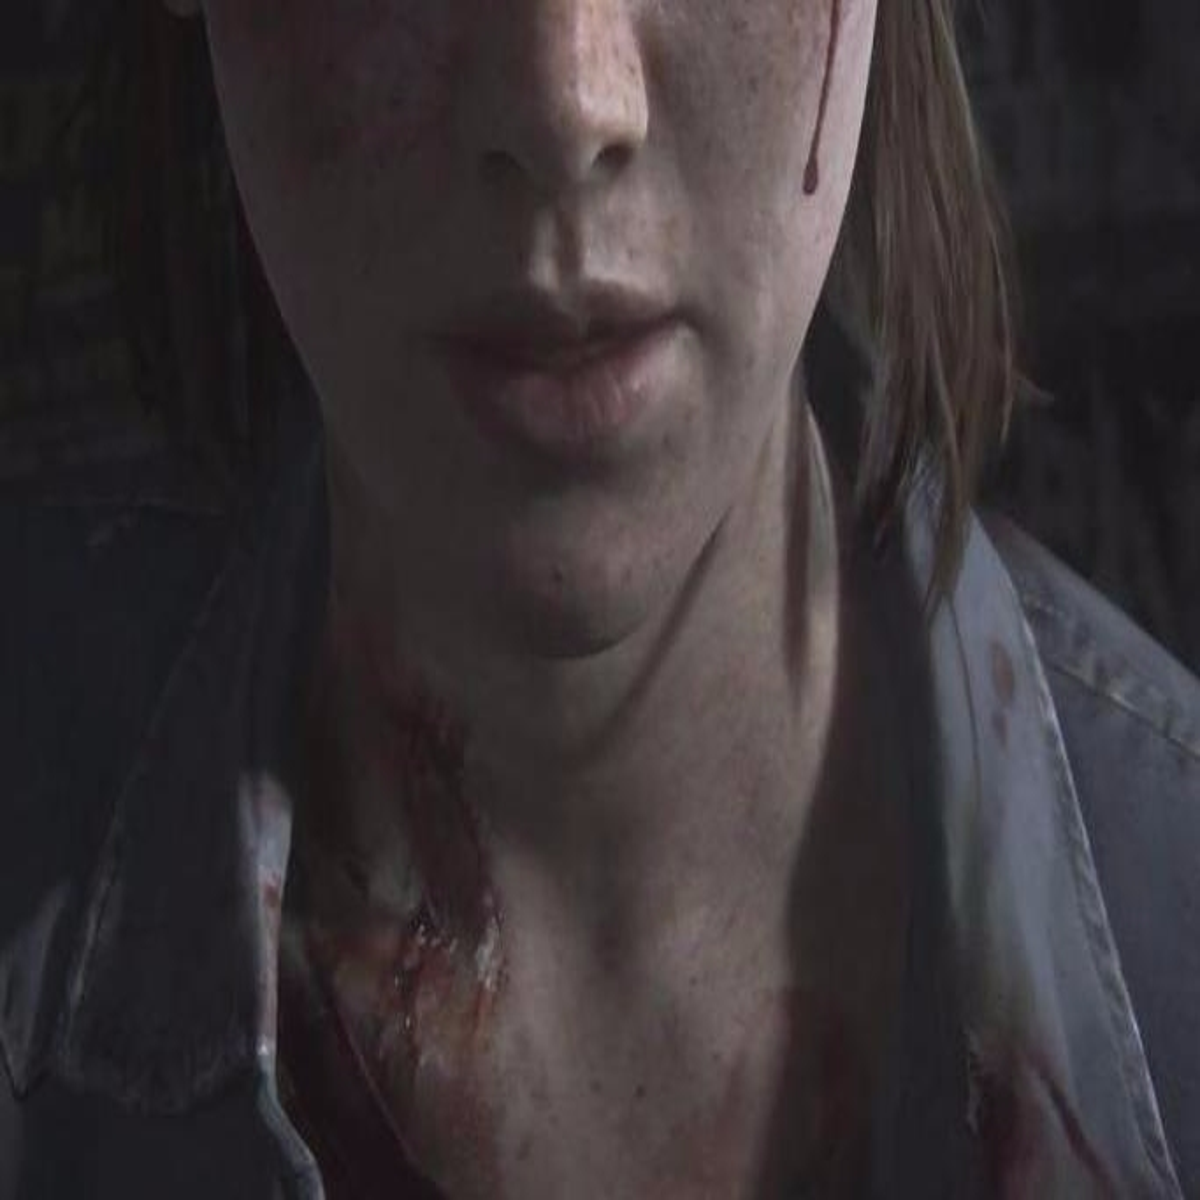 https://assetsio.gnwcdn.com/ellie-is-the-lead-character-in-the-last-of-us-part-2-1480804545192.jpg?width=1200&height=1200&fit=crop&quality=100&format=png&enable=upscale&auto=webp